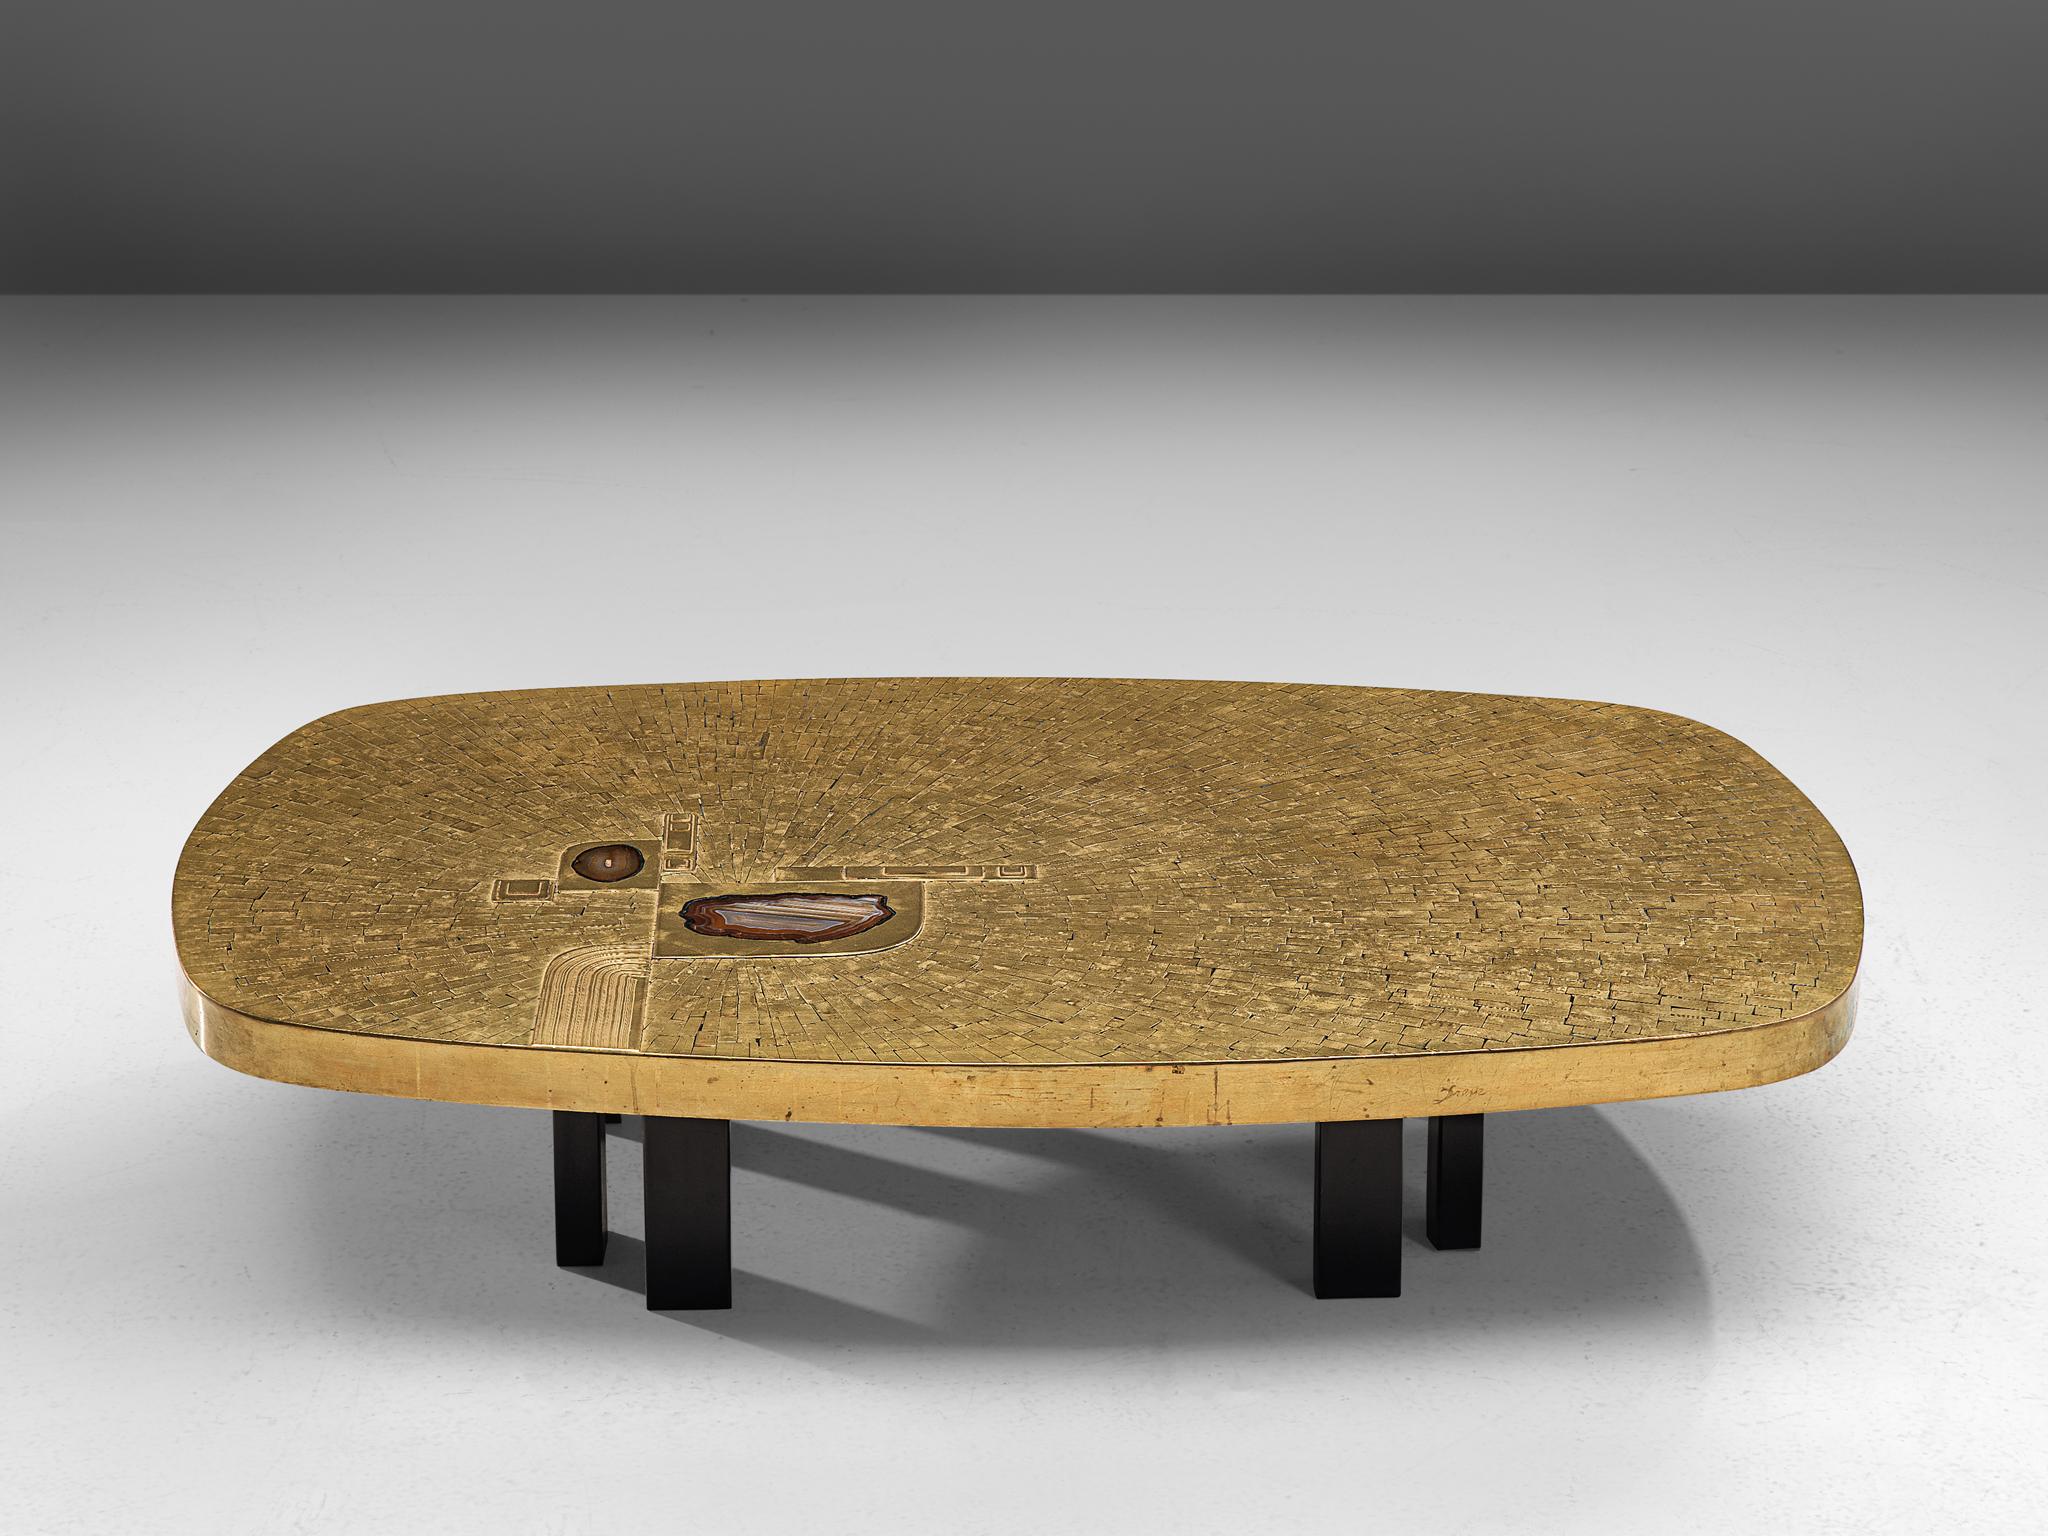 Jean Claude Dresse, coffee table, brass, agate and steel, Belgium, 1970s

A luxurious piece crafted with high attention for detail which is characteristic for the work of the Belgian artist Jean Claude Dresse. The combination of materials, steel,